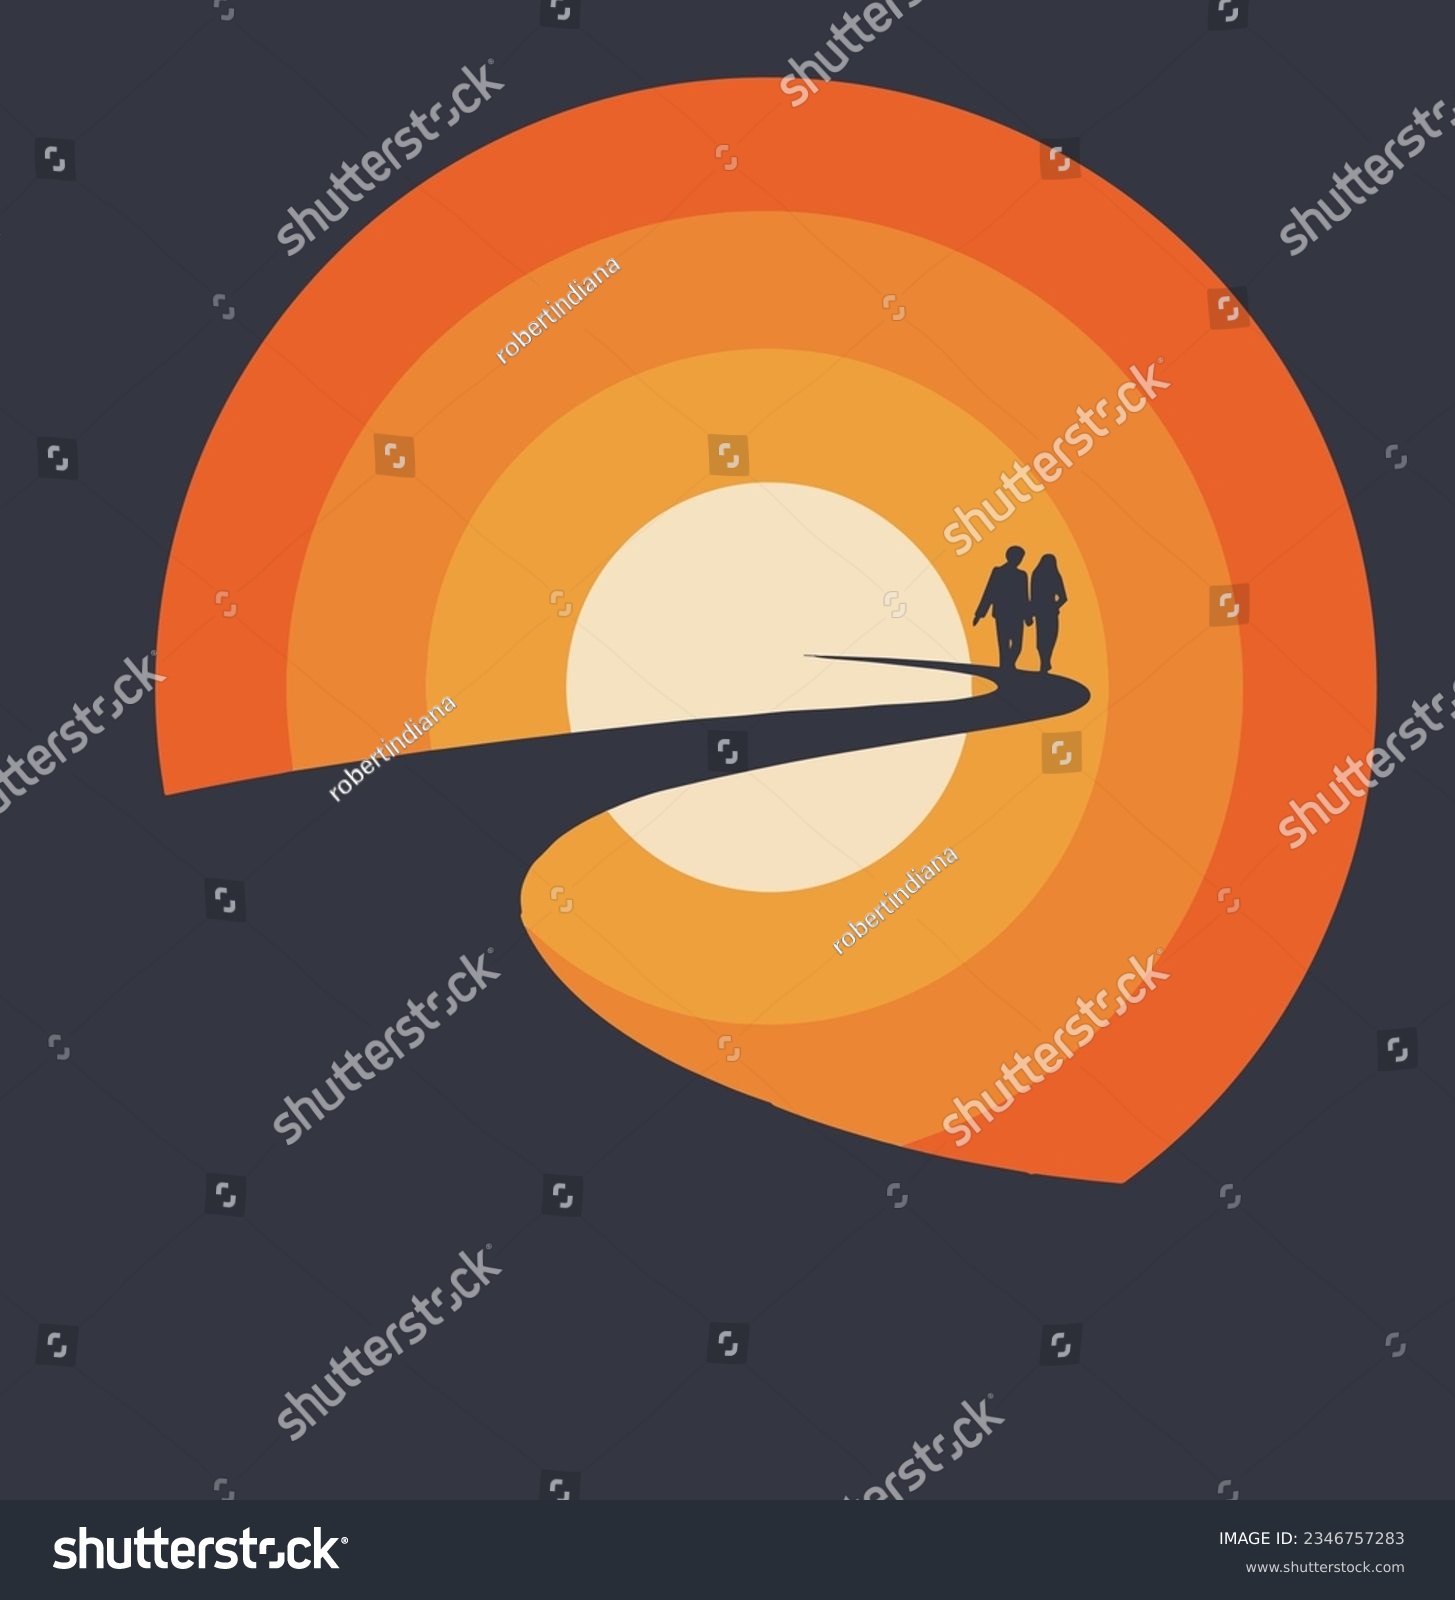 SVG of A man and woman couple stroll down a path into the graphic setting sun design in an illustration about the path of love and life. svg